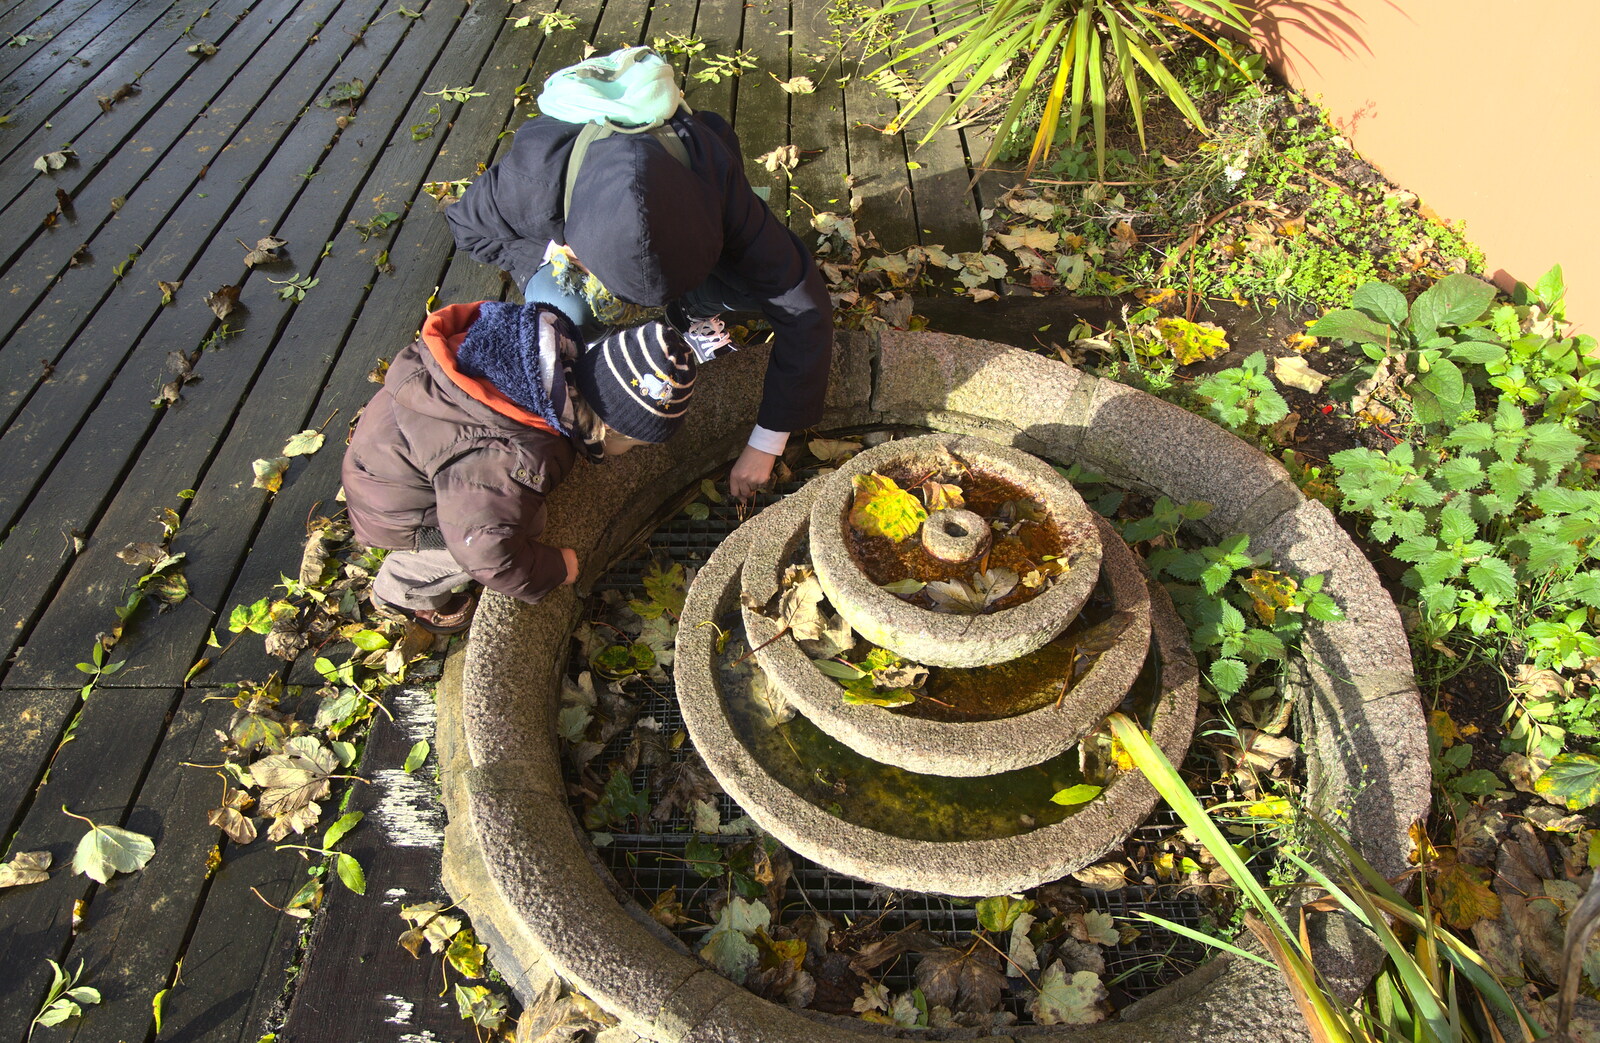 Fred pokes around in a dried up fountain from Another Trip to Peckham, Southwark, London - 28th October 2012